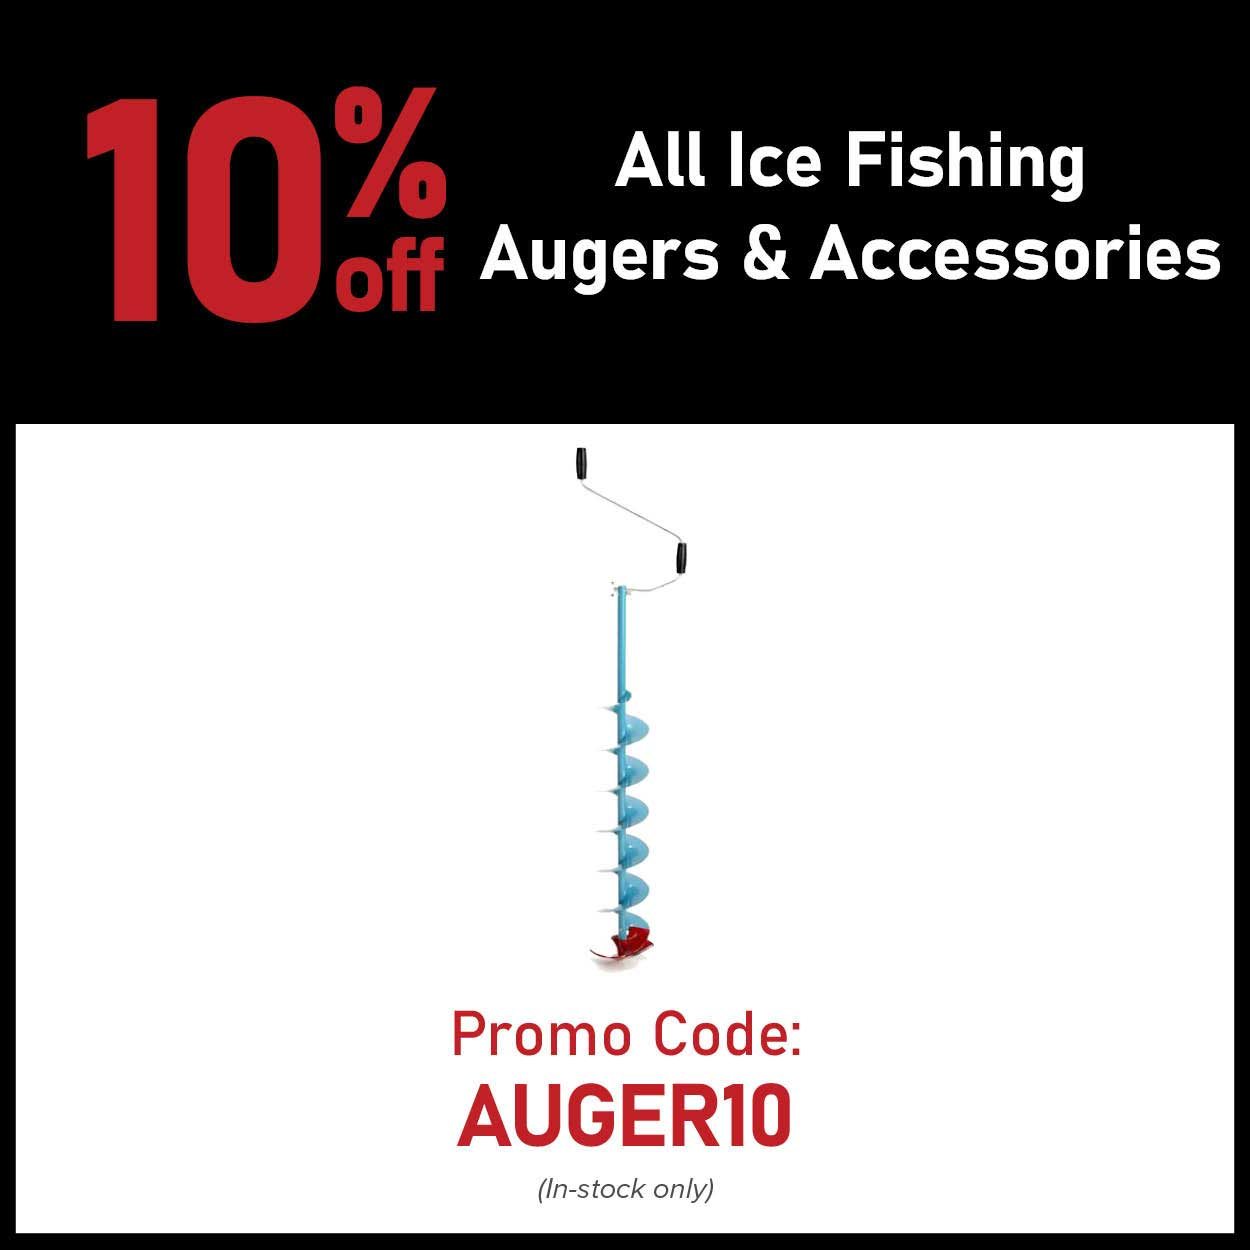 10% Off All Ice Fishing Augers & Accessories Promo Code: AUGER10 (In-stock only)